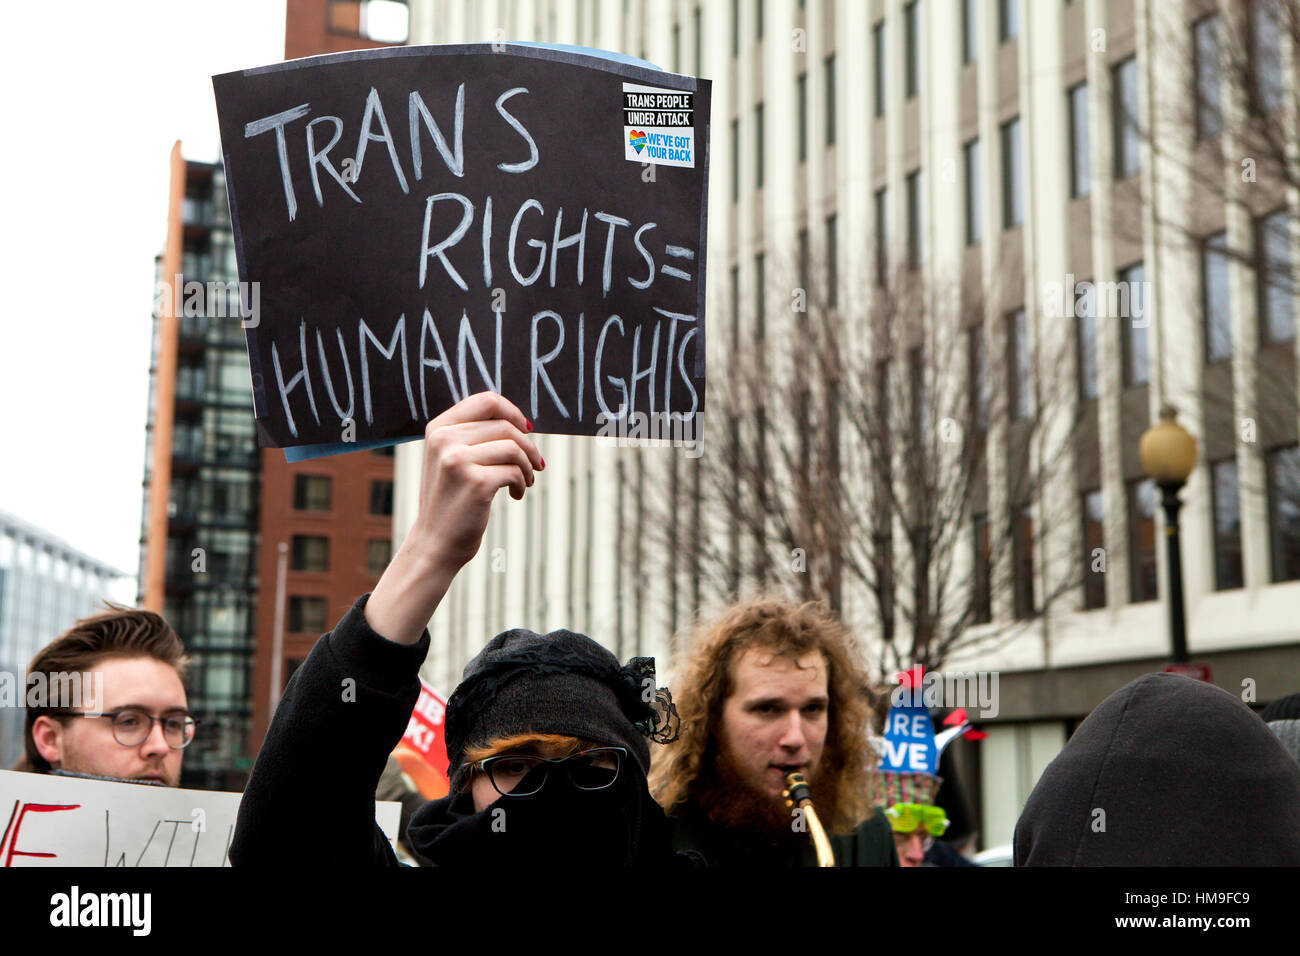 Woman holding Transgenger rights sign during protest - Washington, DC USA Stock Photo